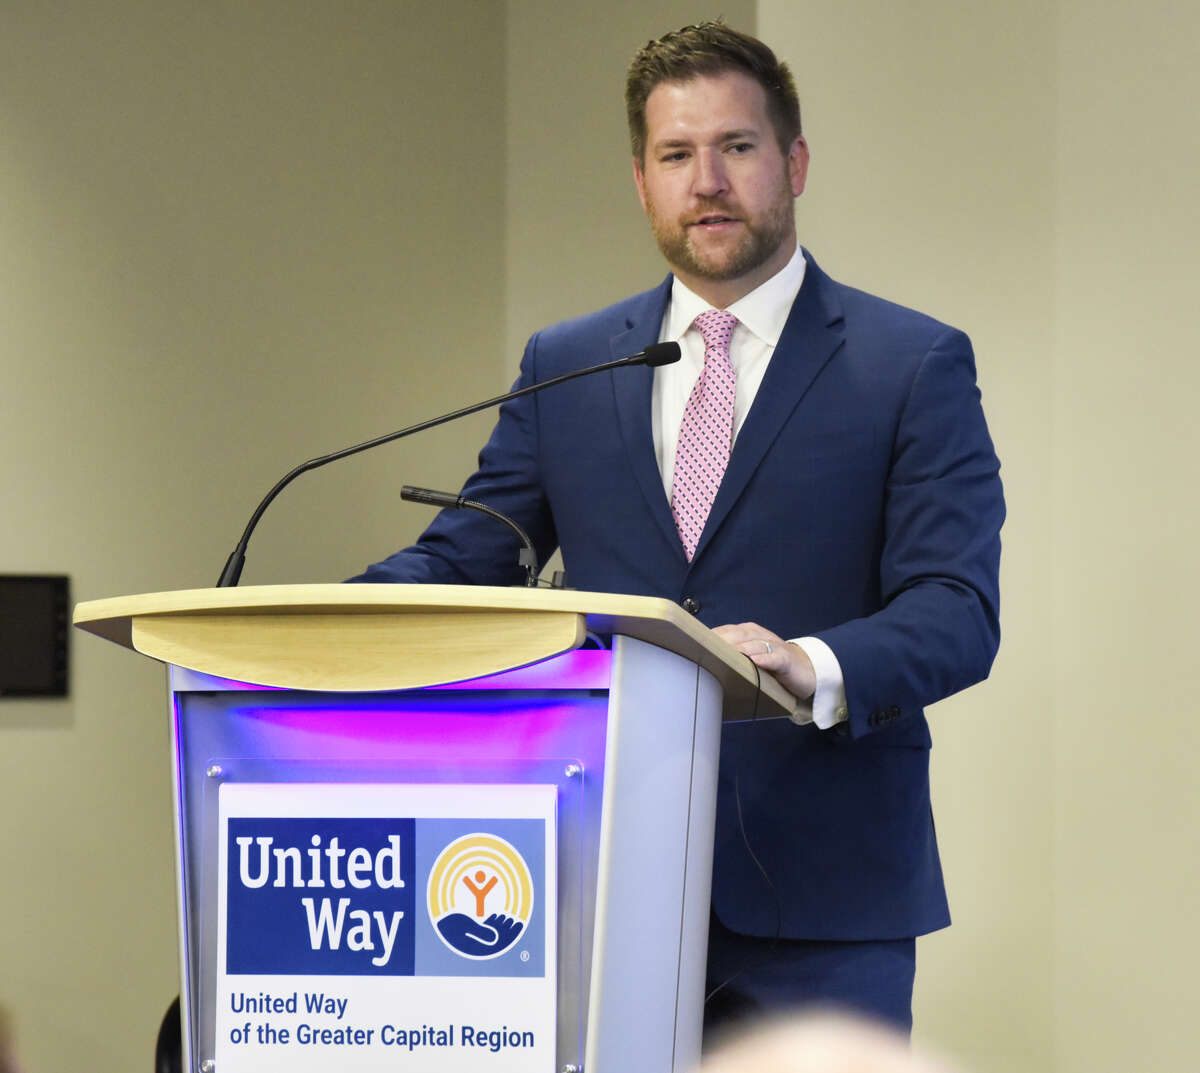 Peter Gannon, president and CEO of the United Way of the Greater Capital Region, speaks at the Hearst Media Center on Wednesday, Oct. 16, 2019, in Colonie, N.Y. (Paul Buckowski/Times Union)